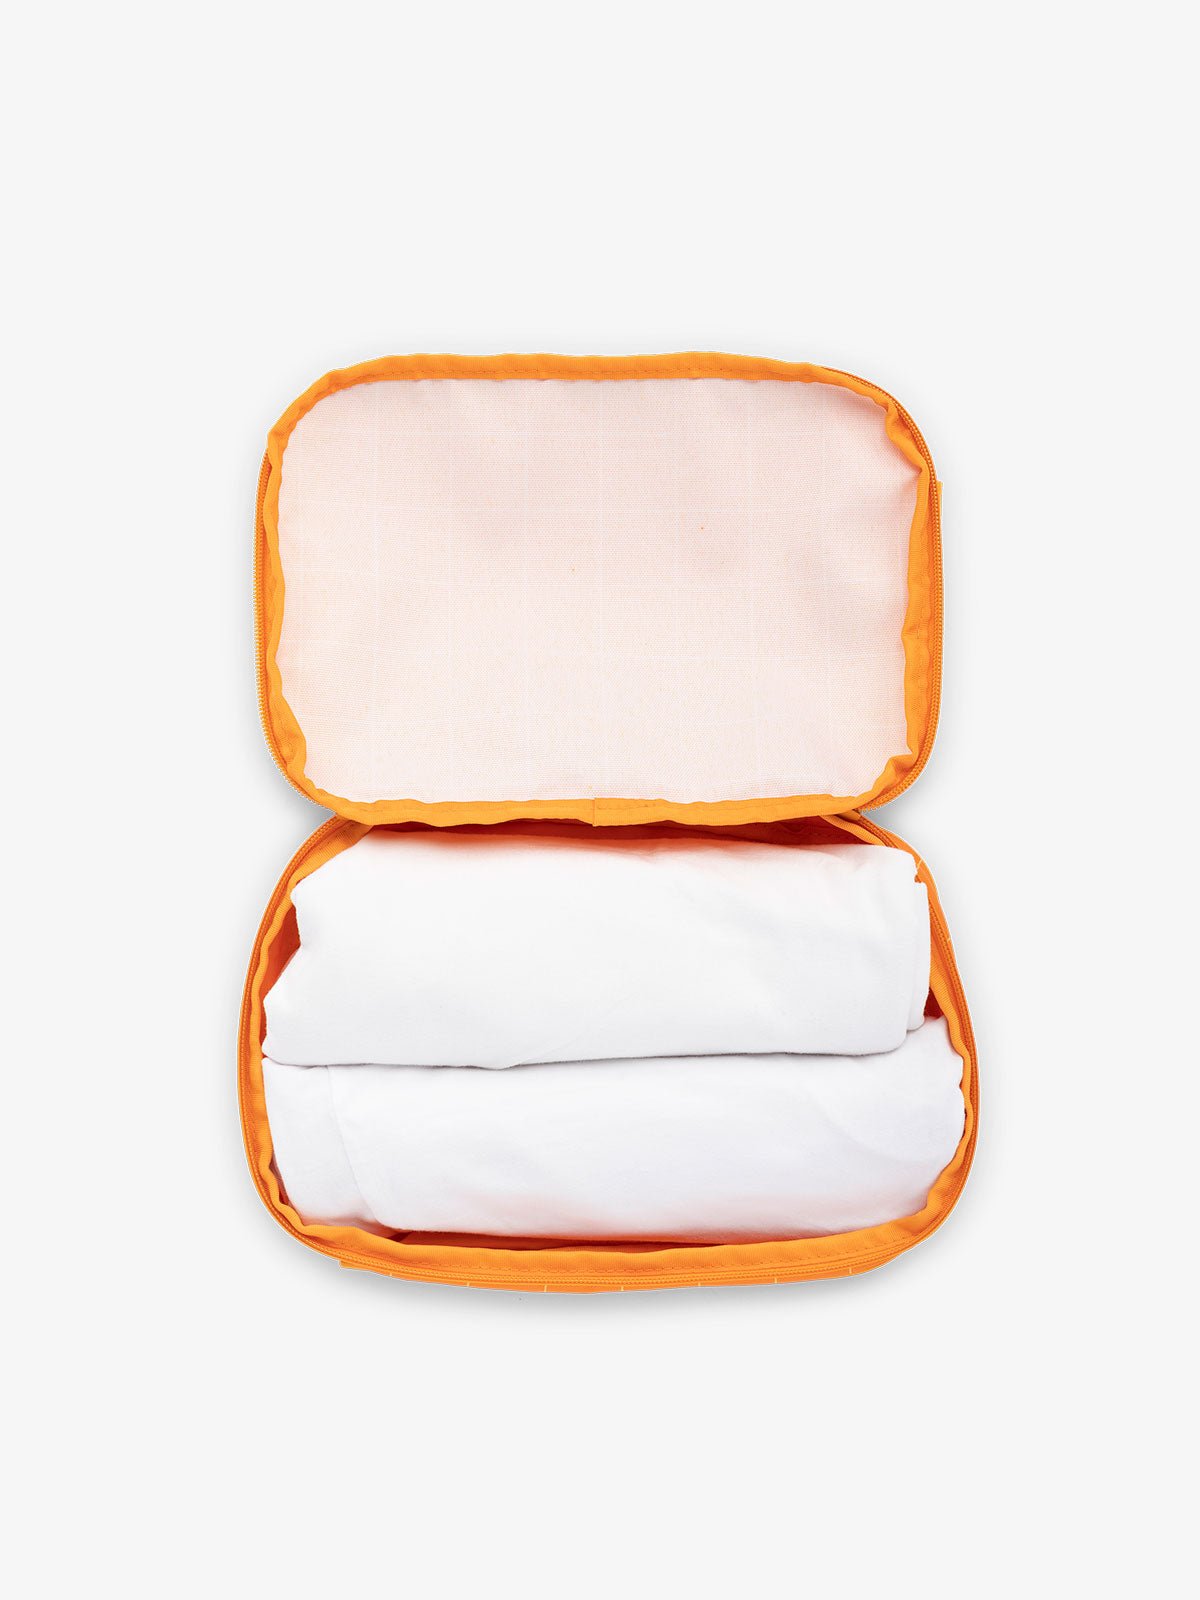 CALPAK small packing cubes for travel made with durable material in orange grid